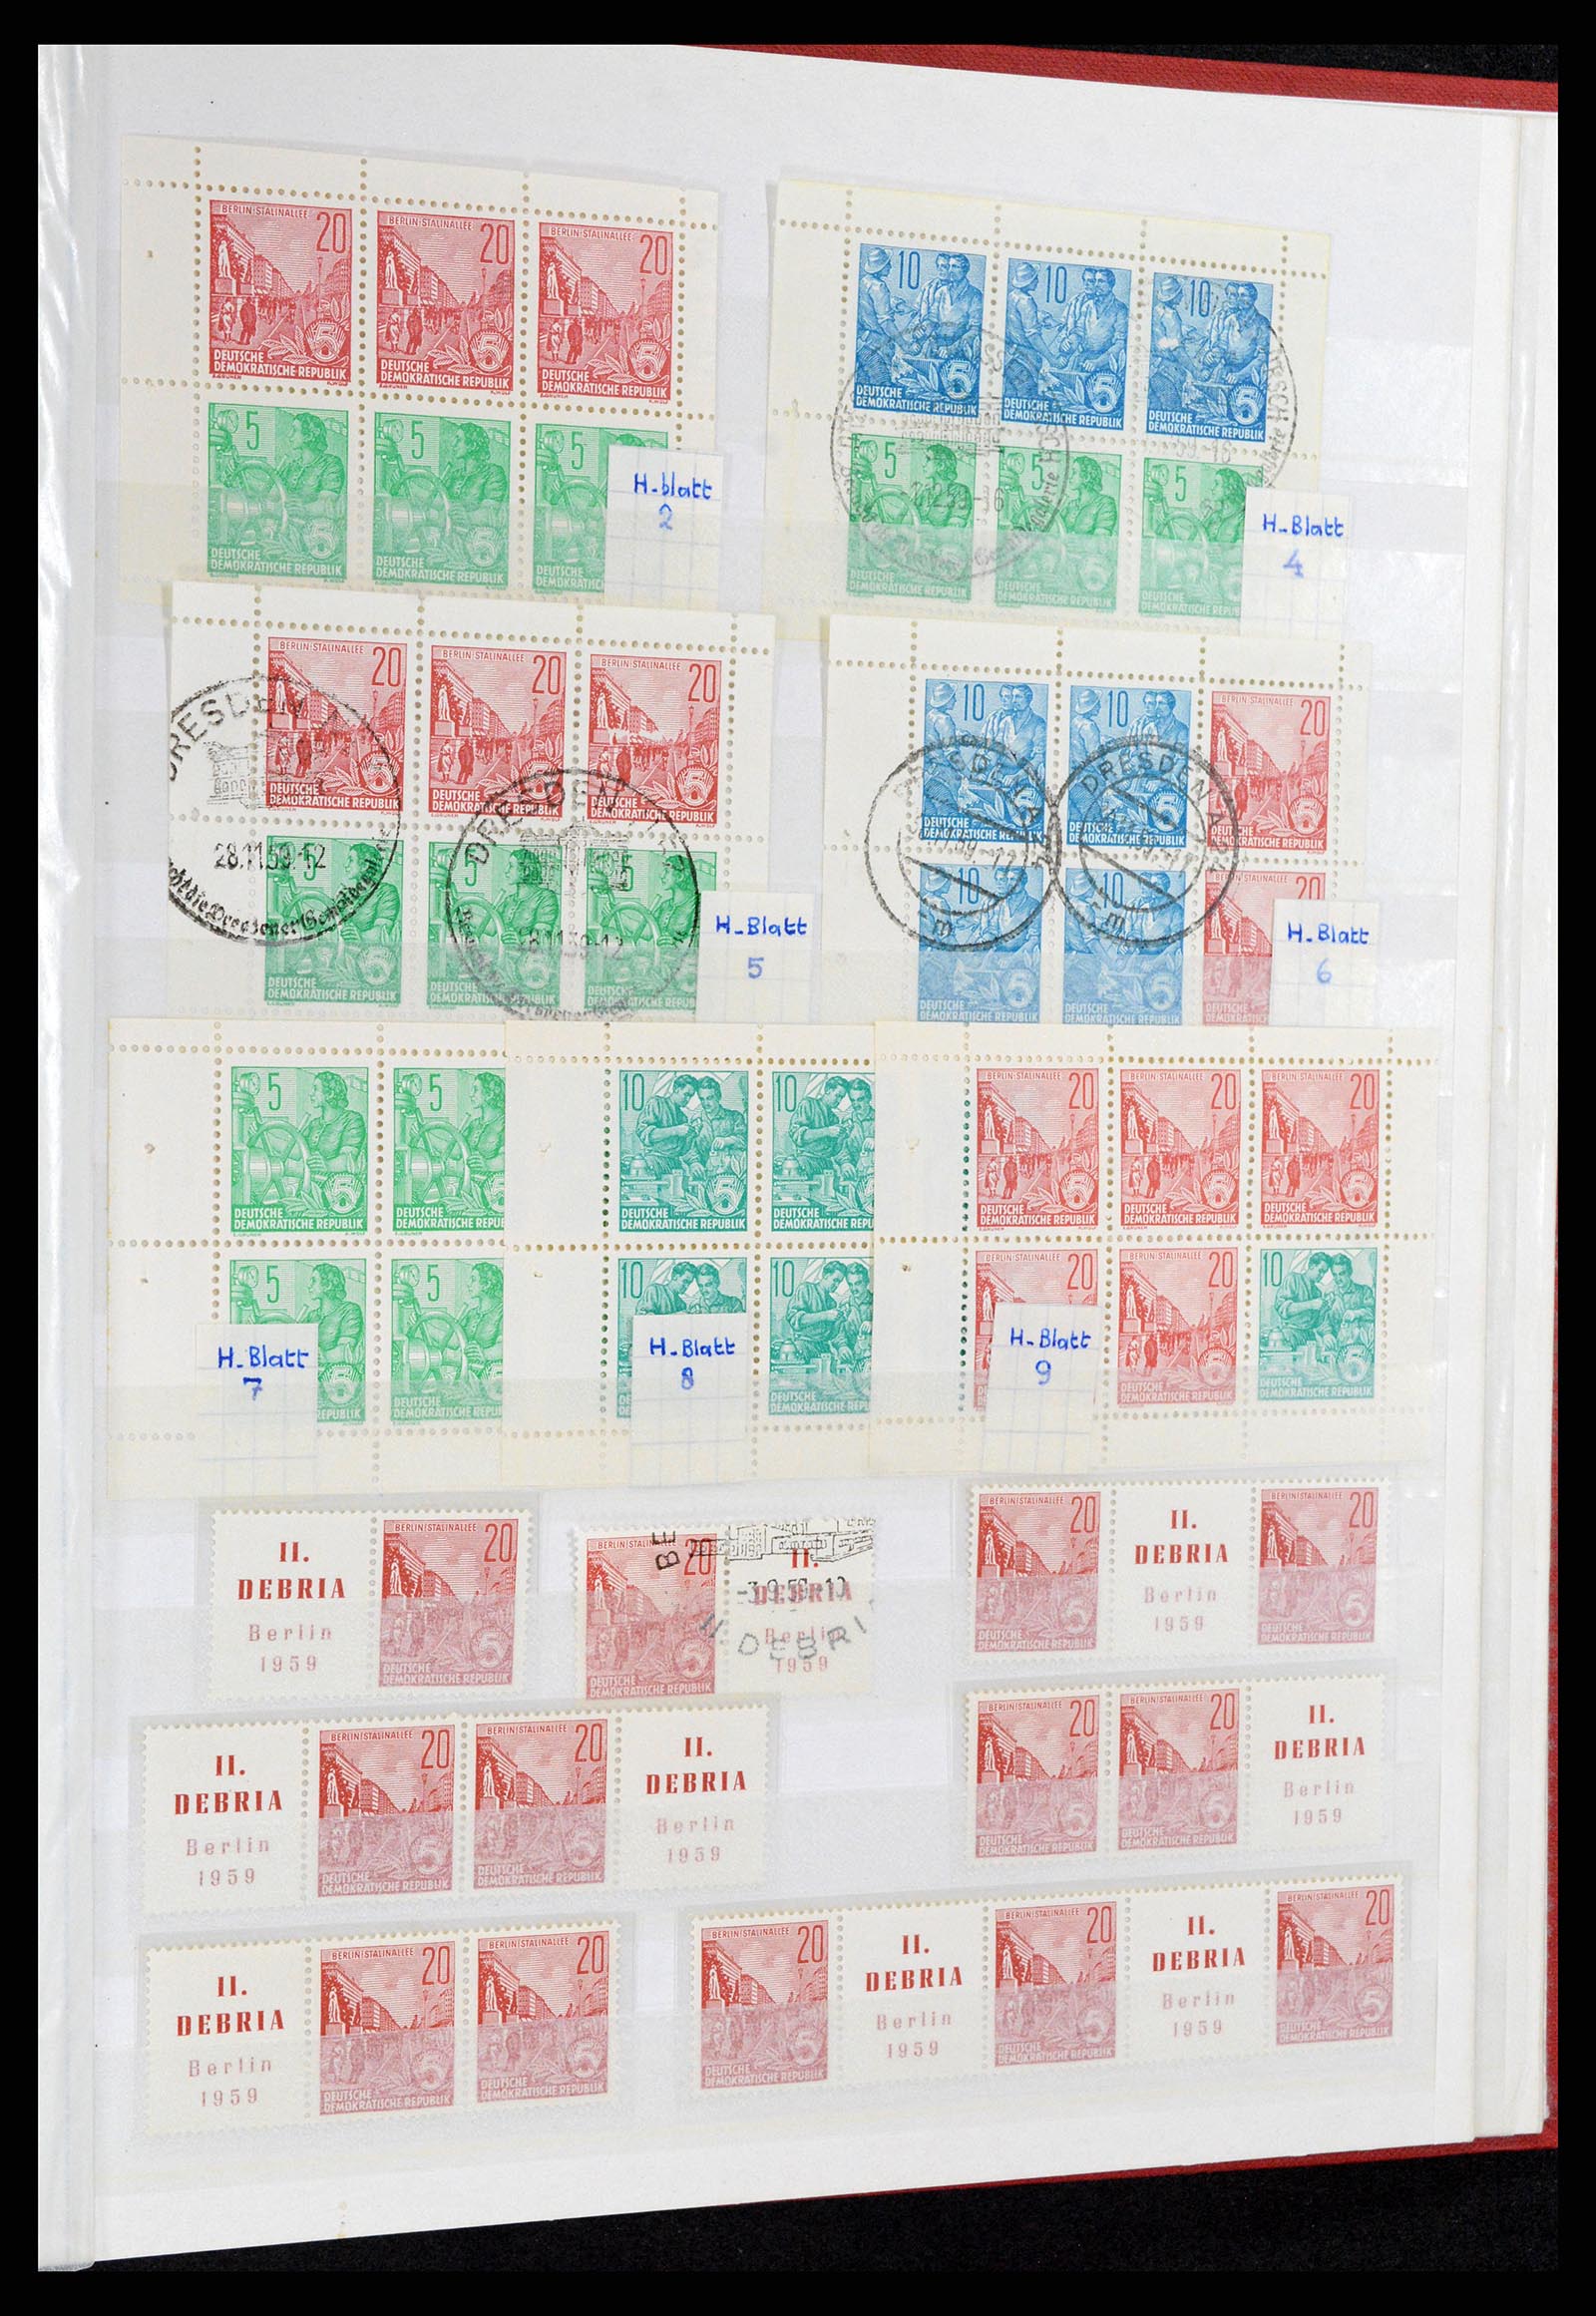 37501 059 - Stamp collection 37501 GDR 1949-1990.